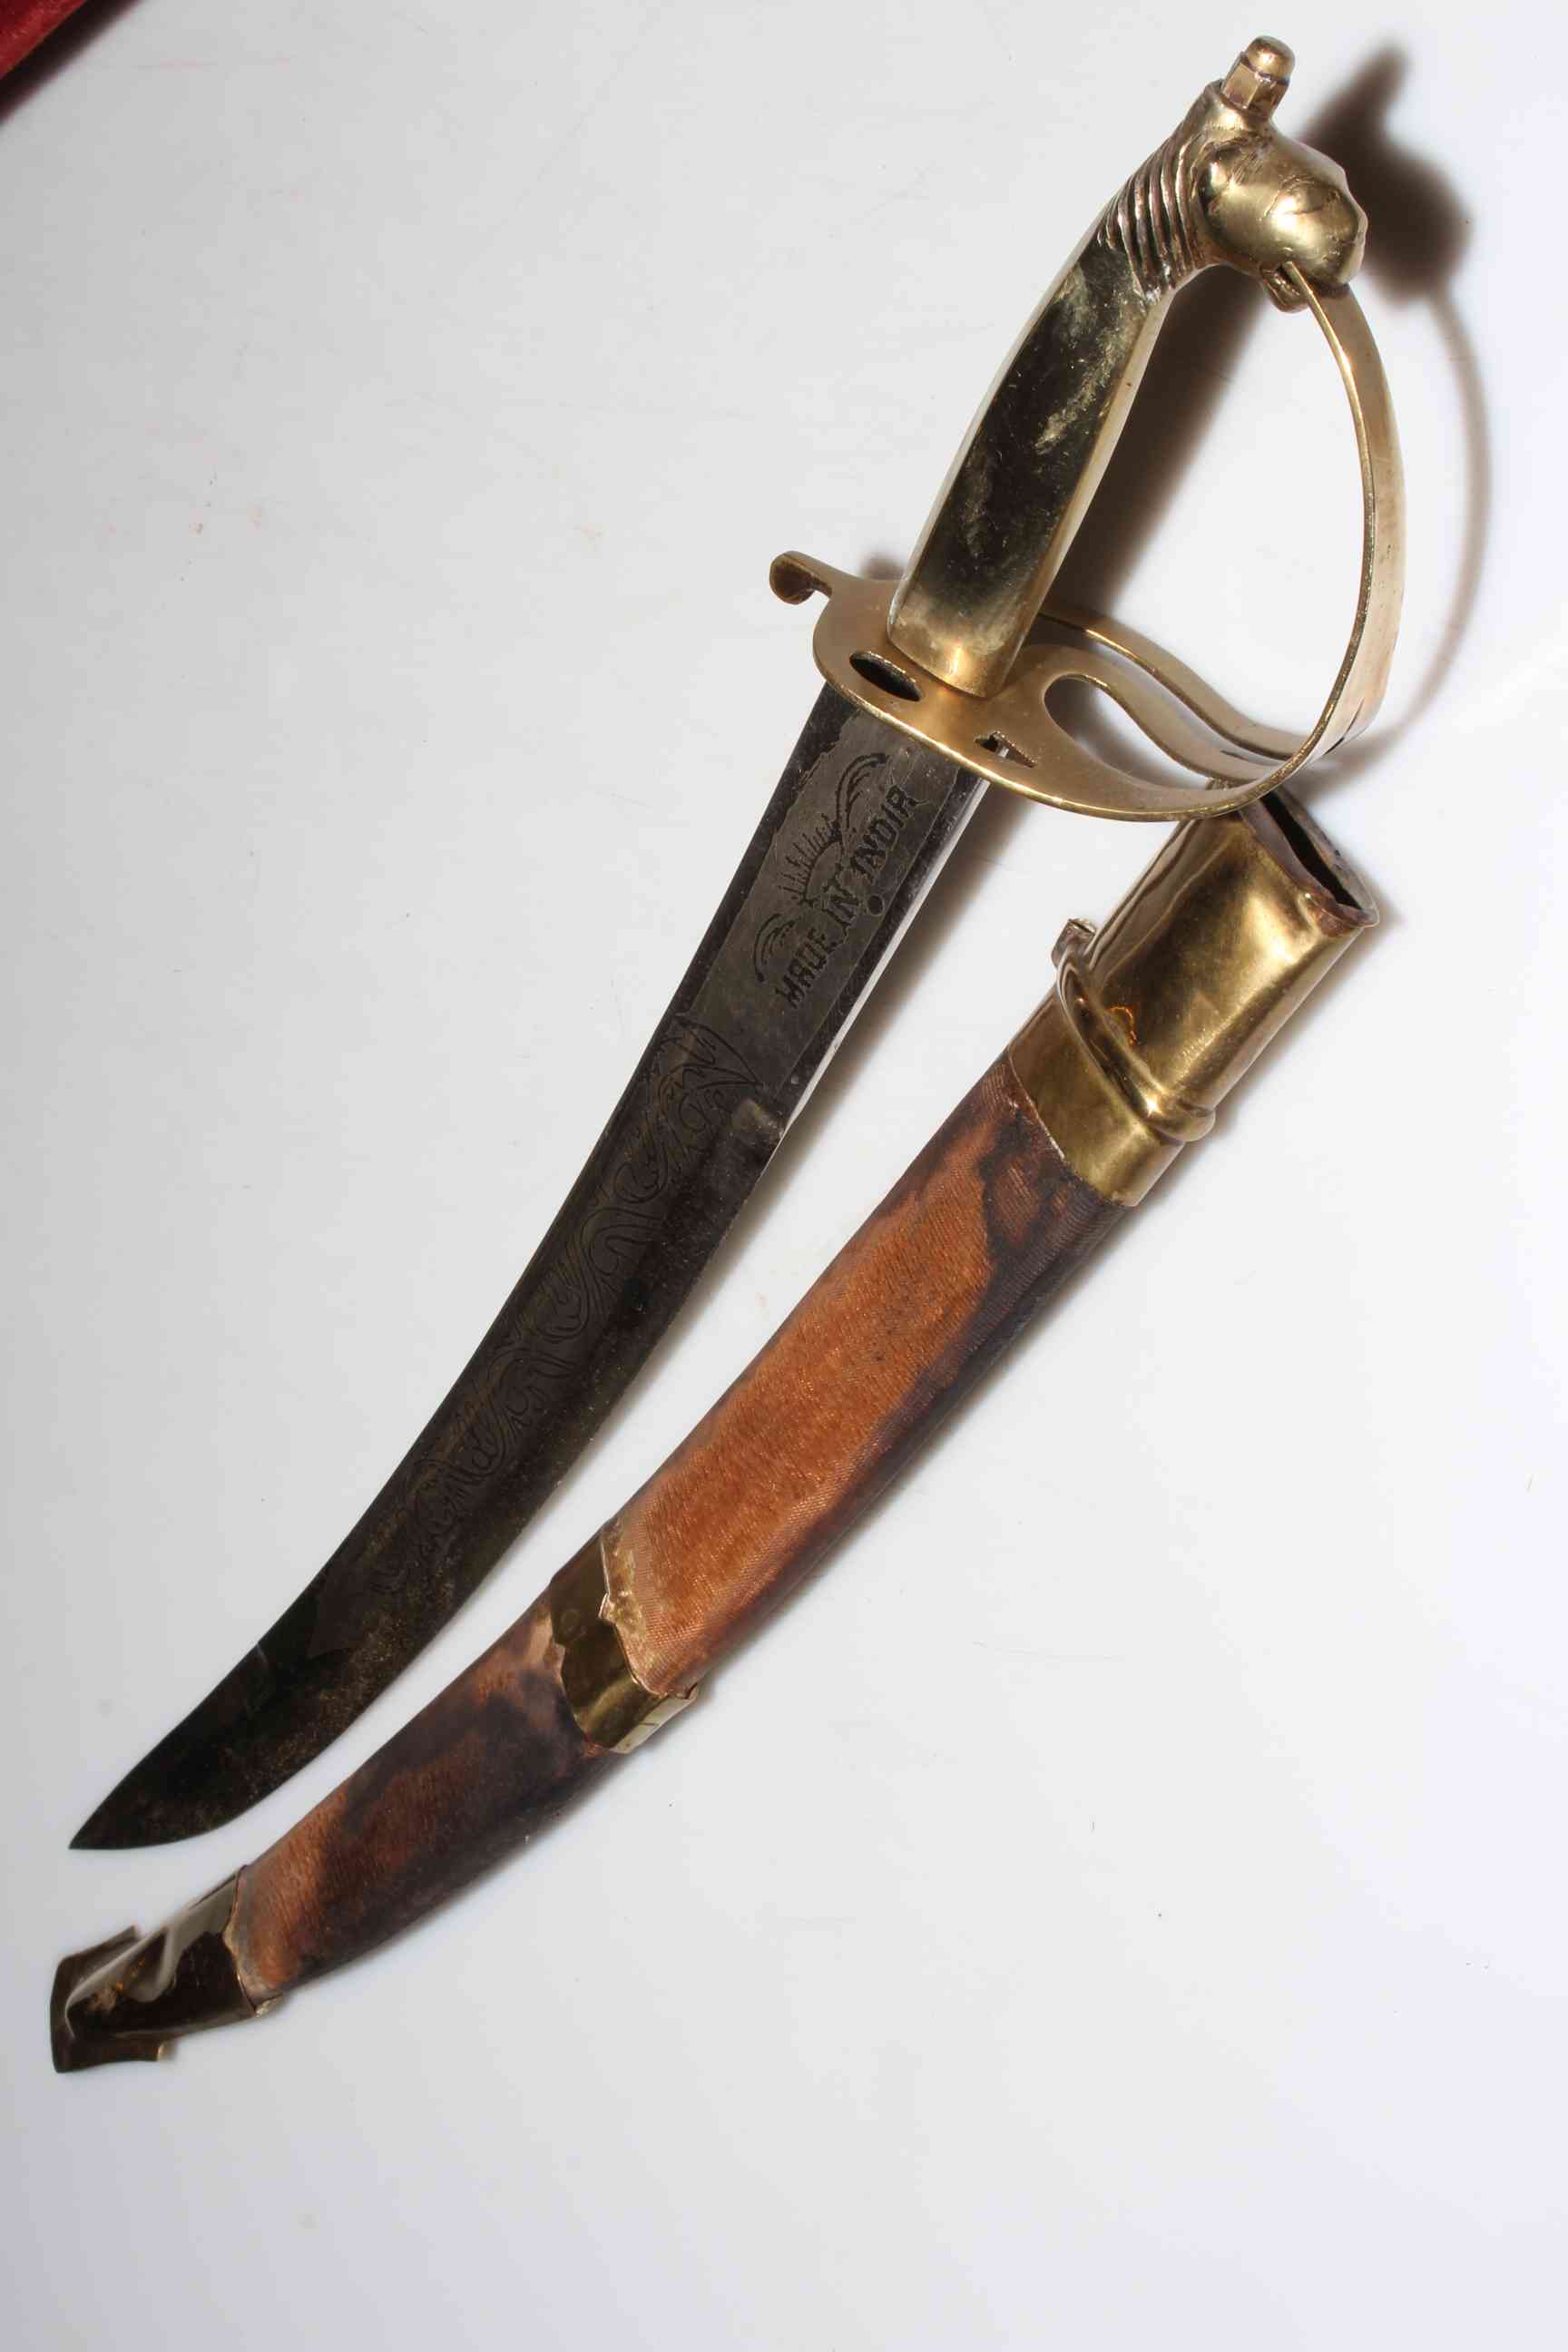 Three ornamental dress swords and scabbards. - Image 2 of 5